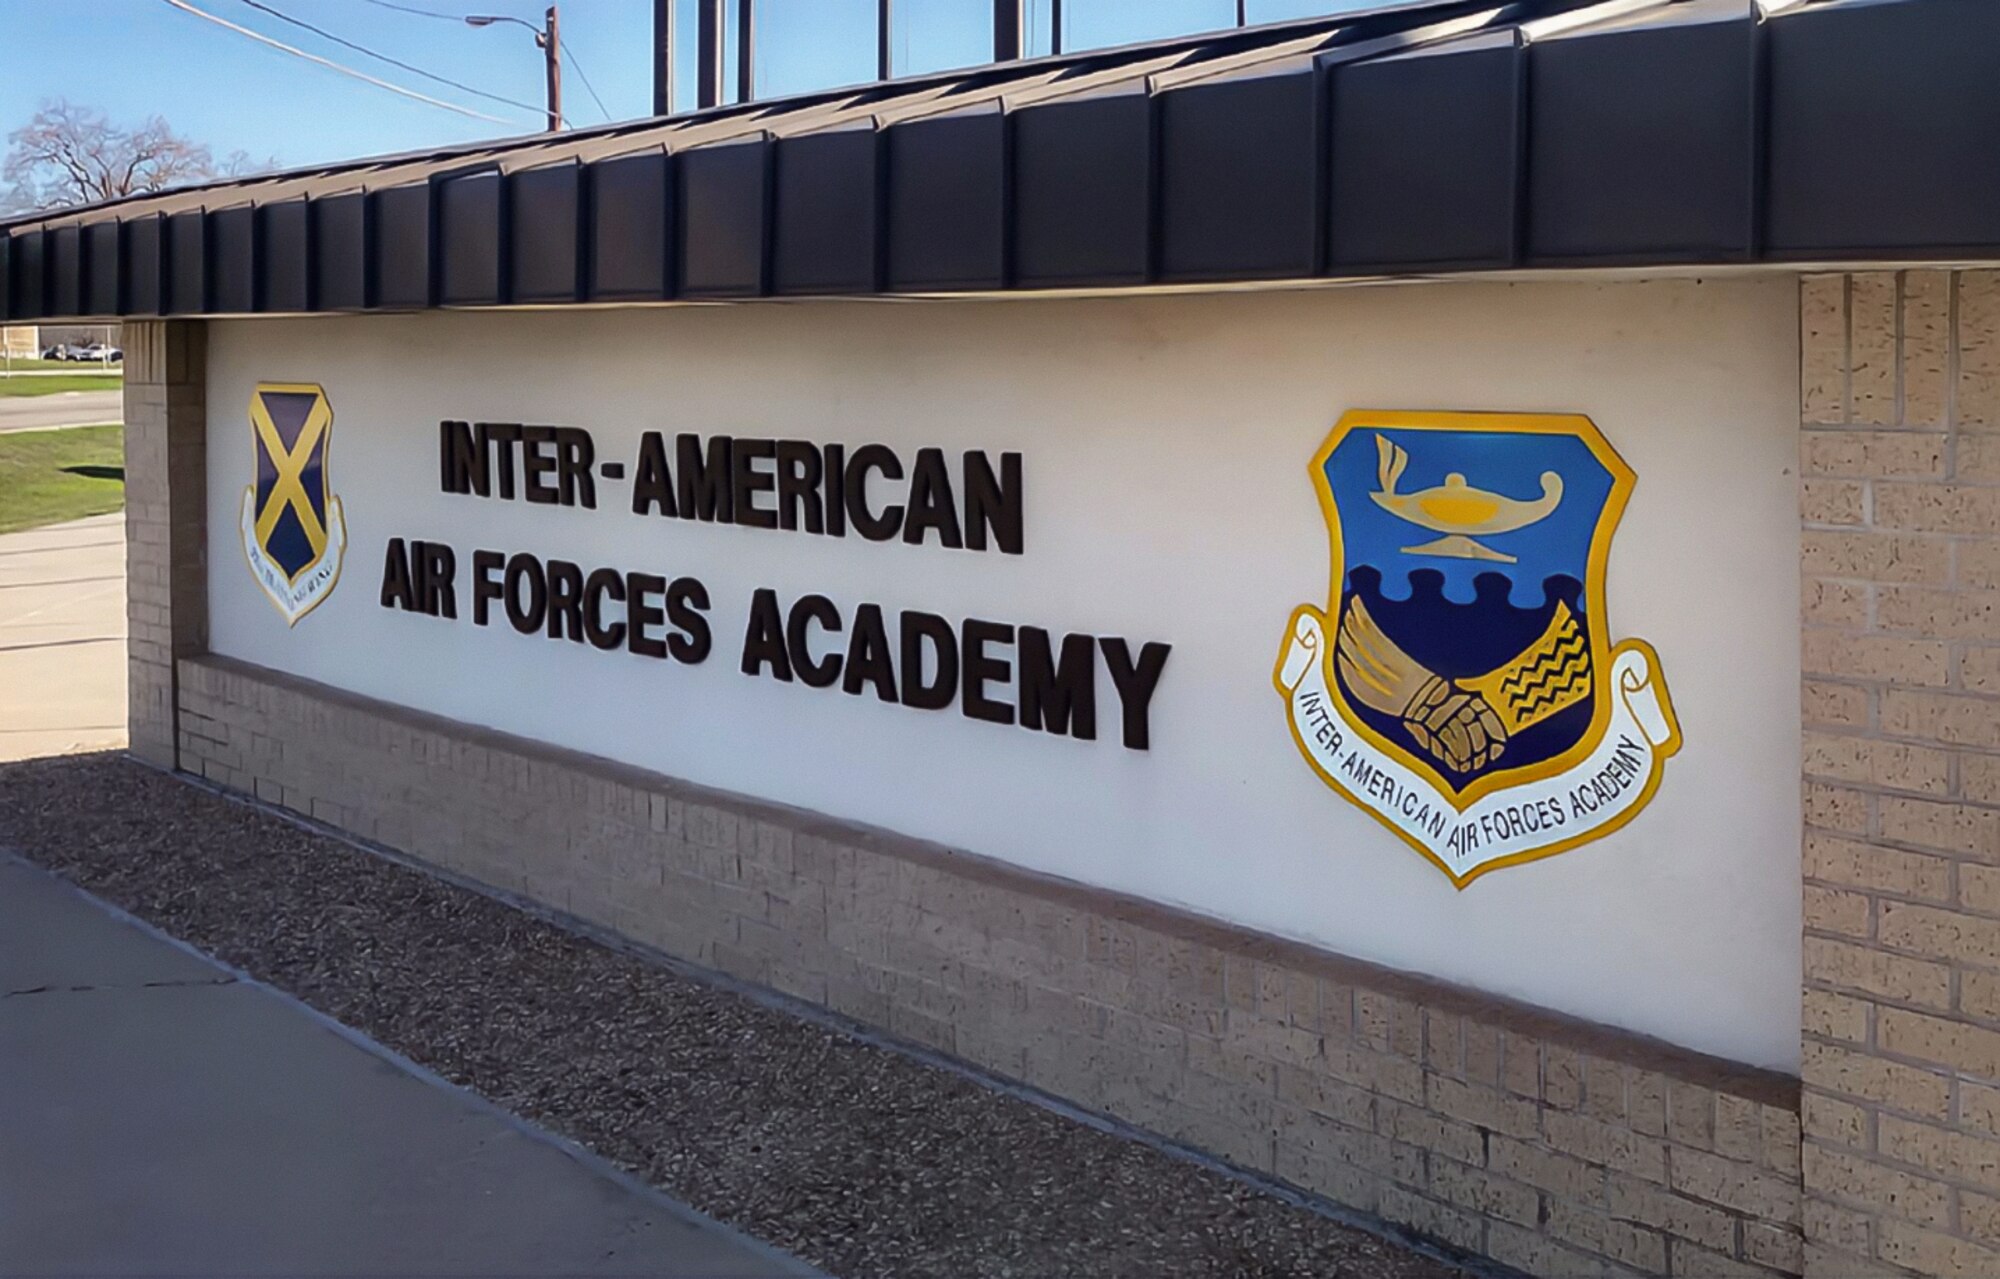 The Inter-American Air Forces Academy